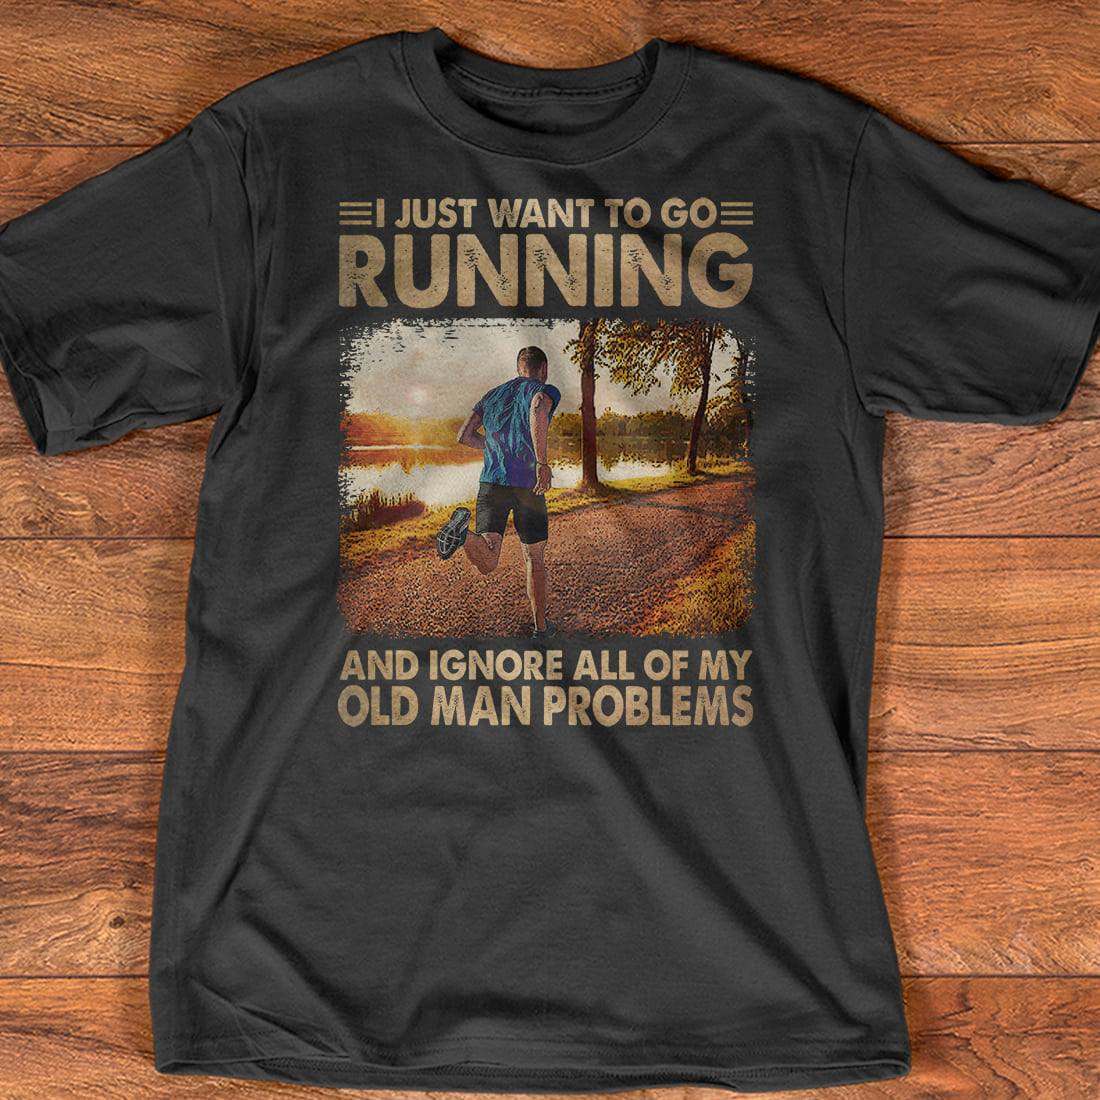 I just want to go running and ignore all of my old man problems